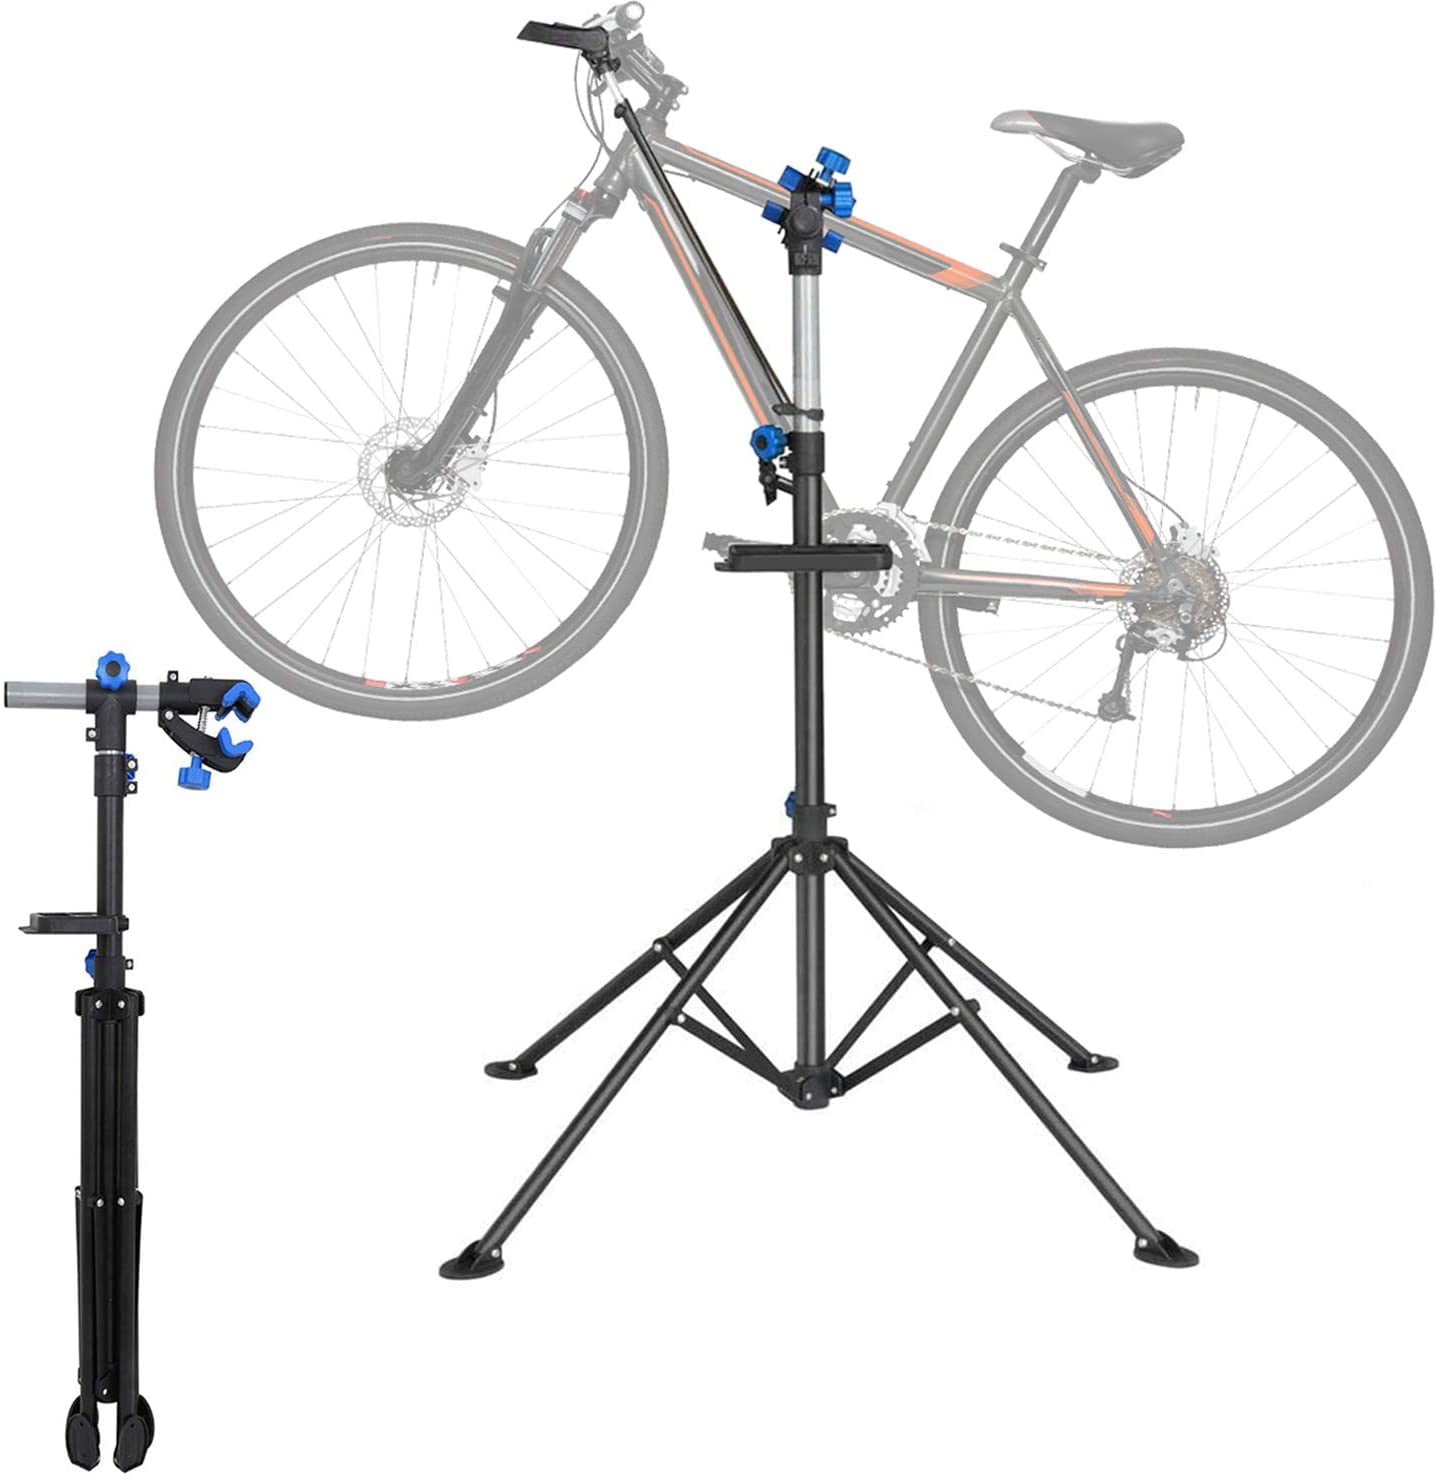 Bike Repair Stand Aluminum Alloy Material Light Weight Foldable Bicycle Repair Rack Workstand Home Portable Bicycle Mechanics Workstand for Mountain Bikes and Road Bikes Maintenance